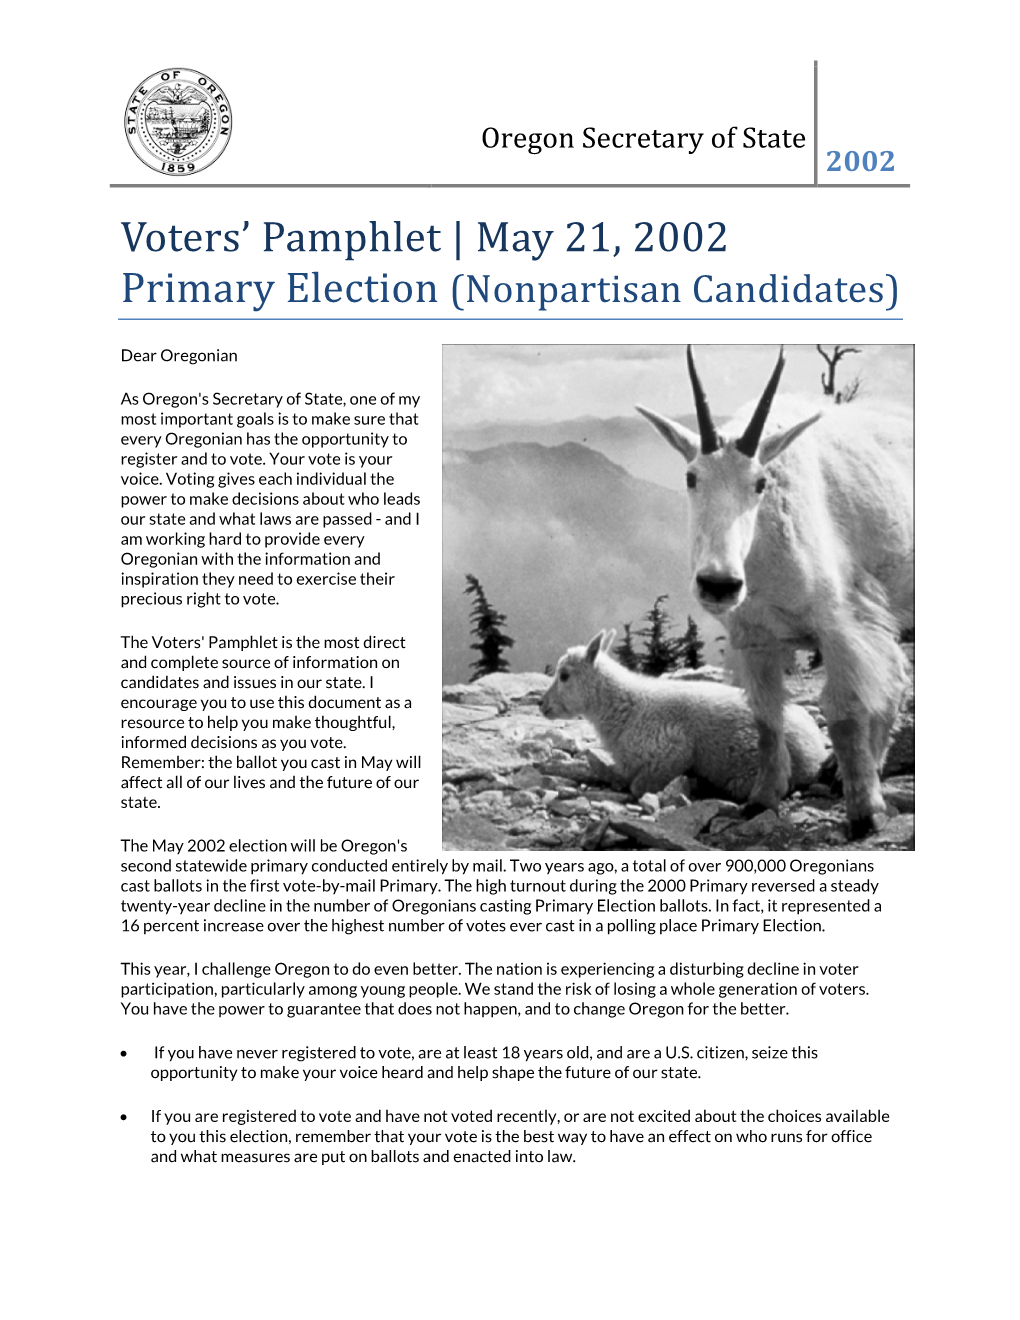 Voters' Pamphlet May 21 2002 Primary Election Nonpartisan Candidates